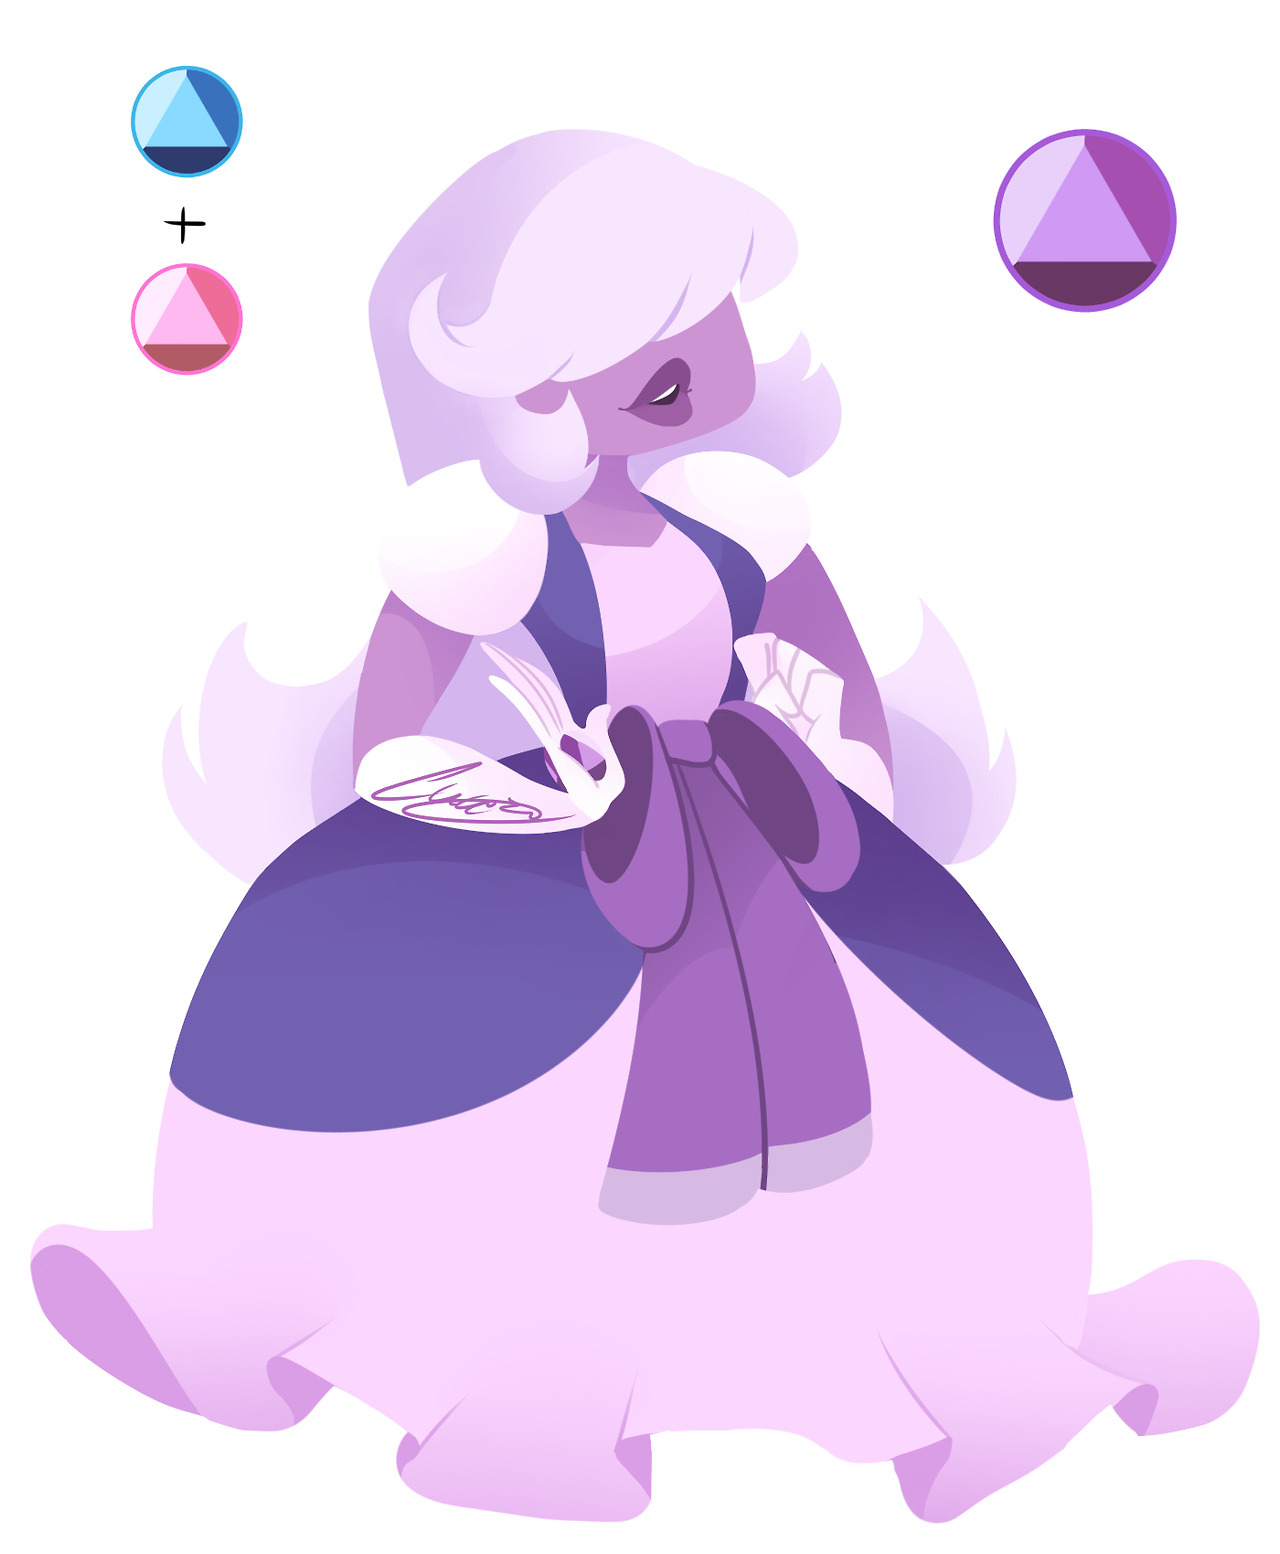 tried out a fusion between sapphire and pad sapphire as long with lineless art